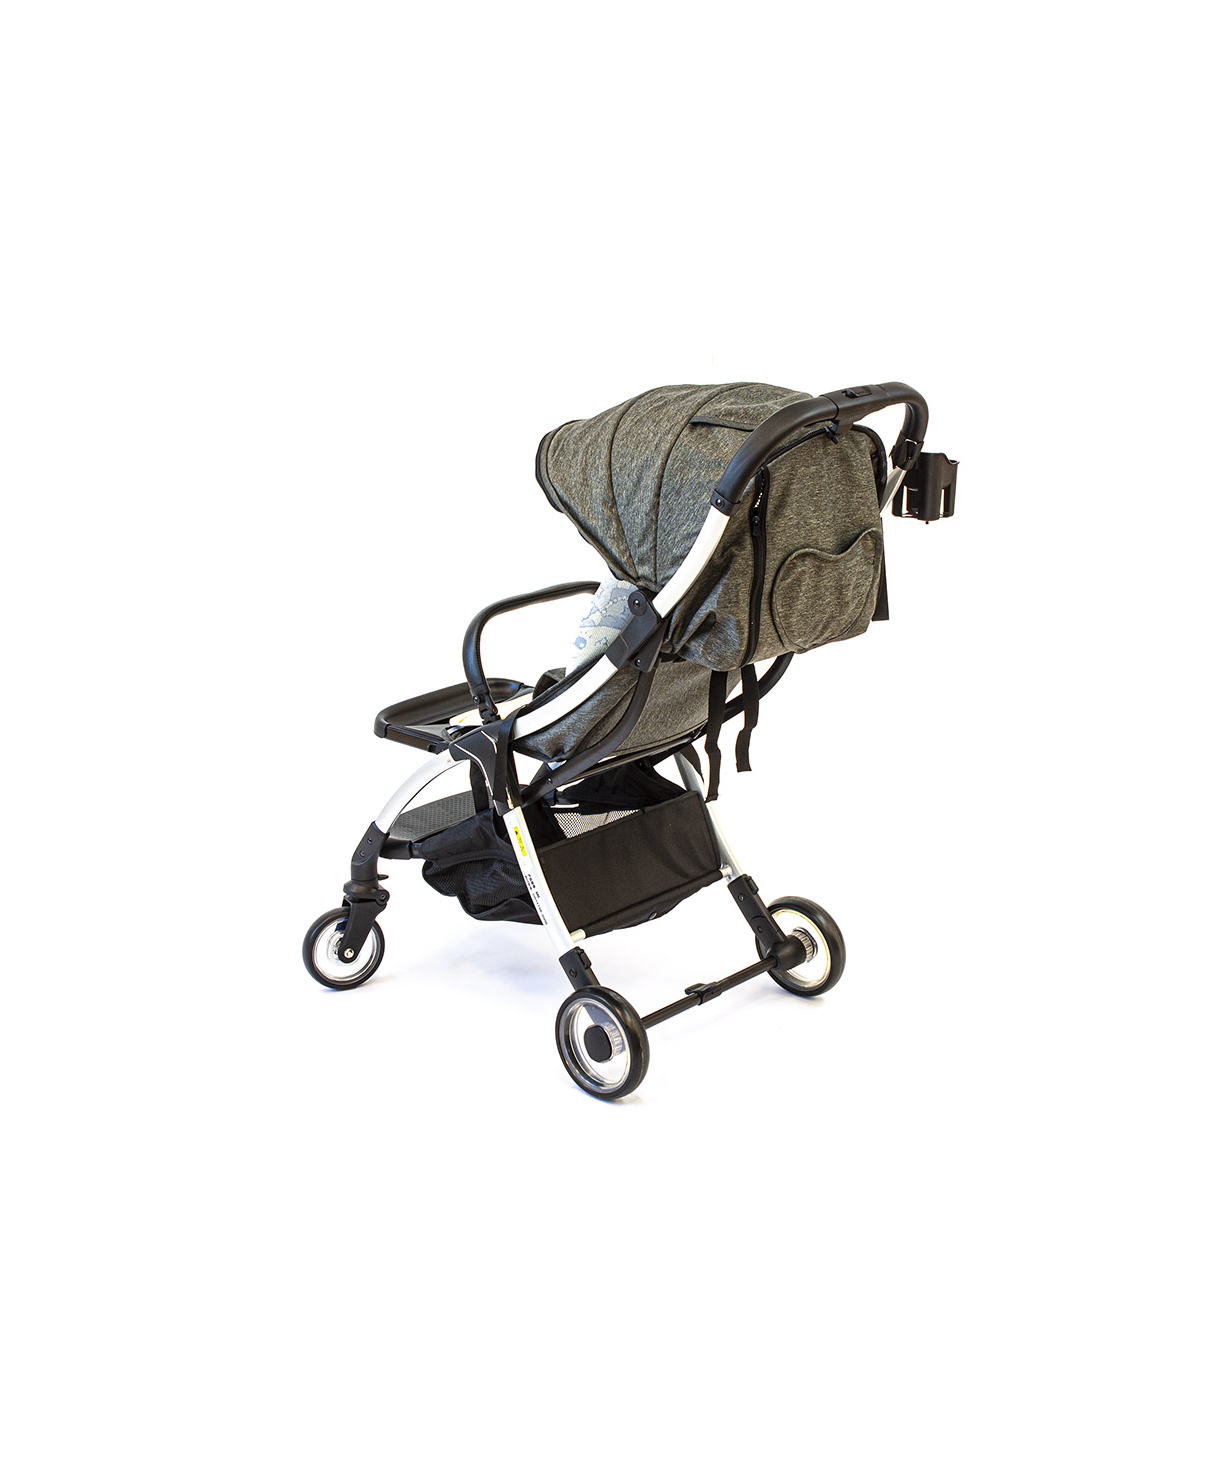 Baby carriage W3